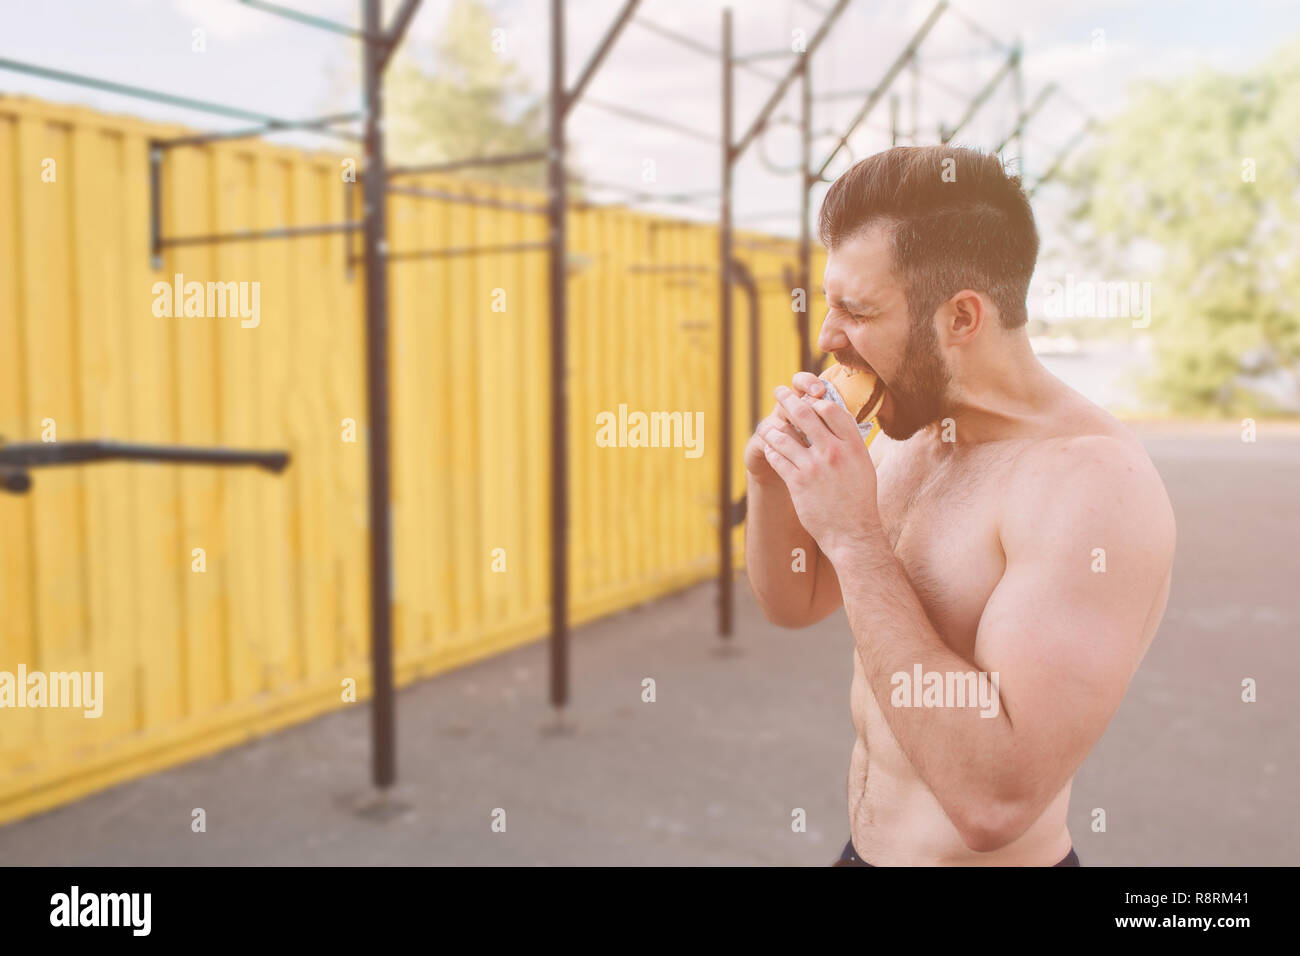 Man eats a hamburger after a workout. Very hungry, fatty and unhealthy food. Stock Photo